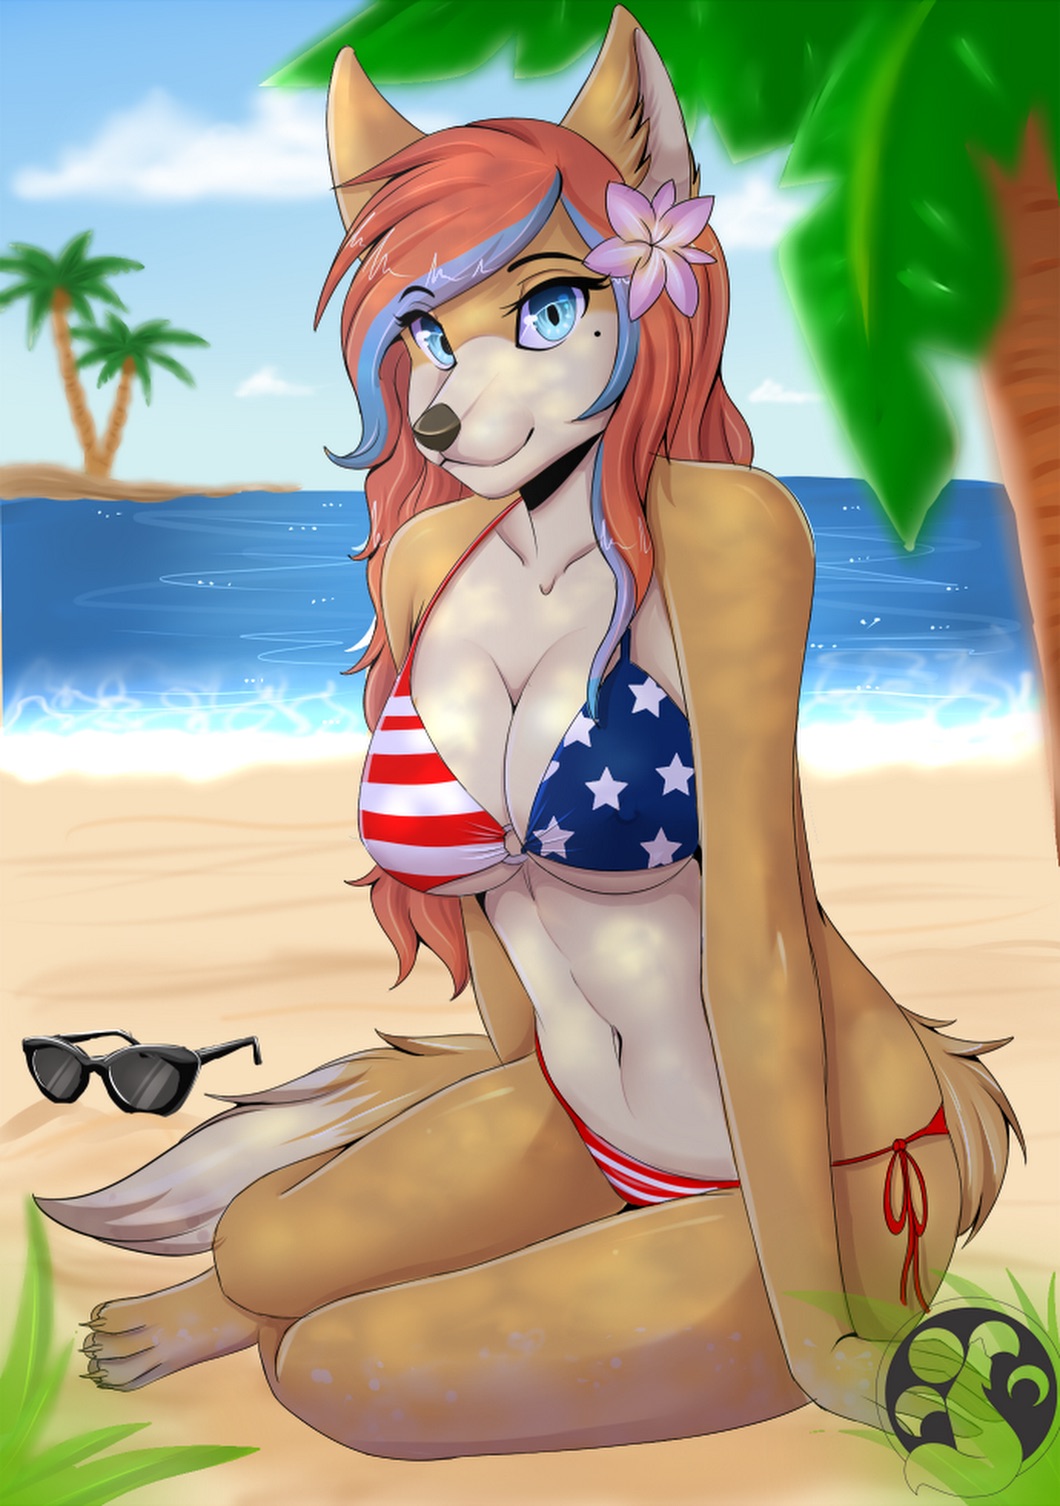 But it is not the mistake of the organization. furry swimsuit at NASA’s Ste...